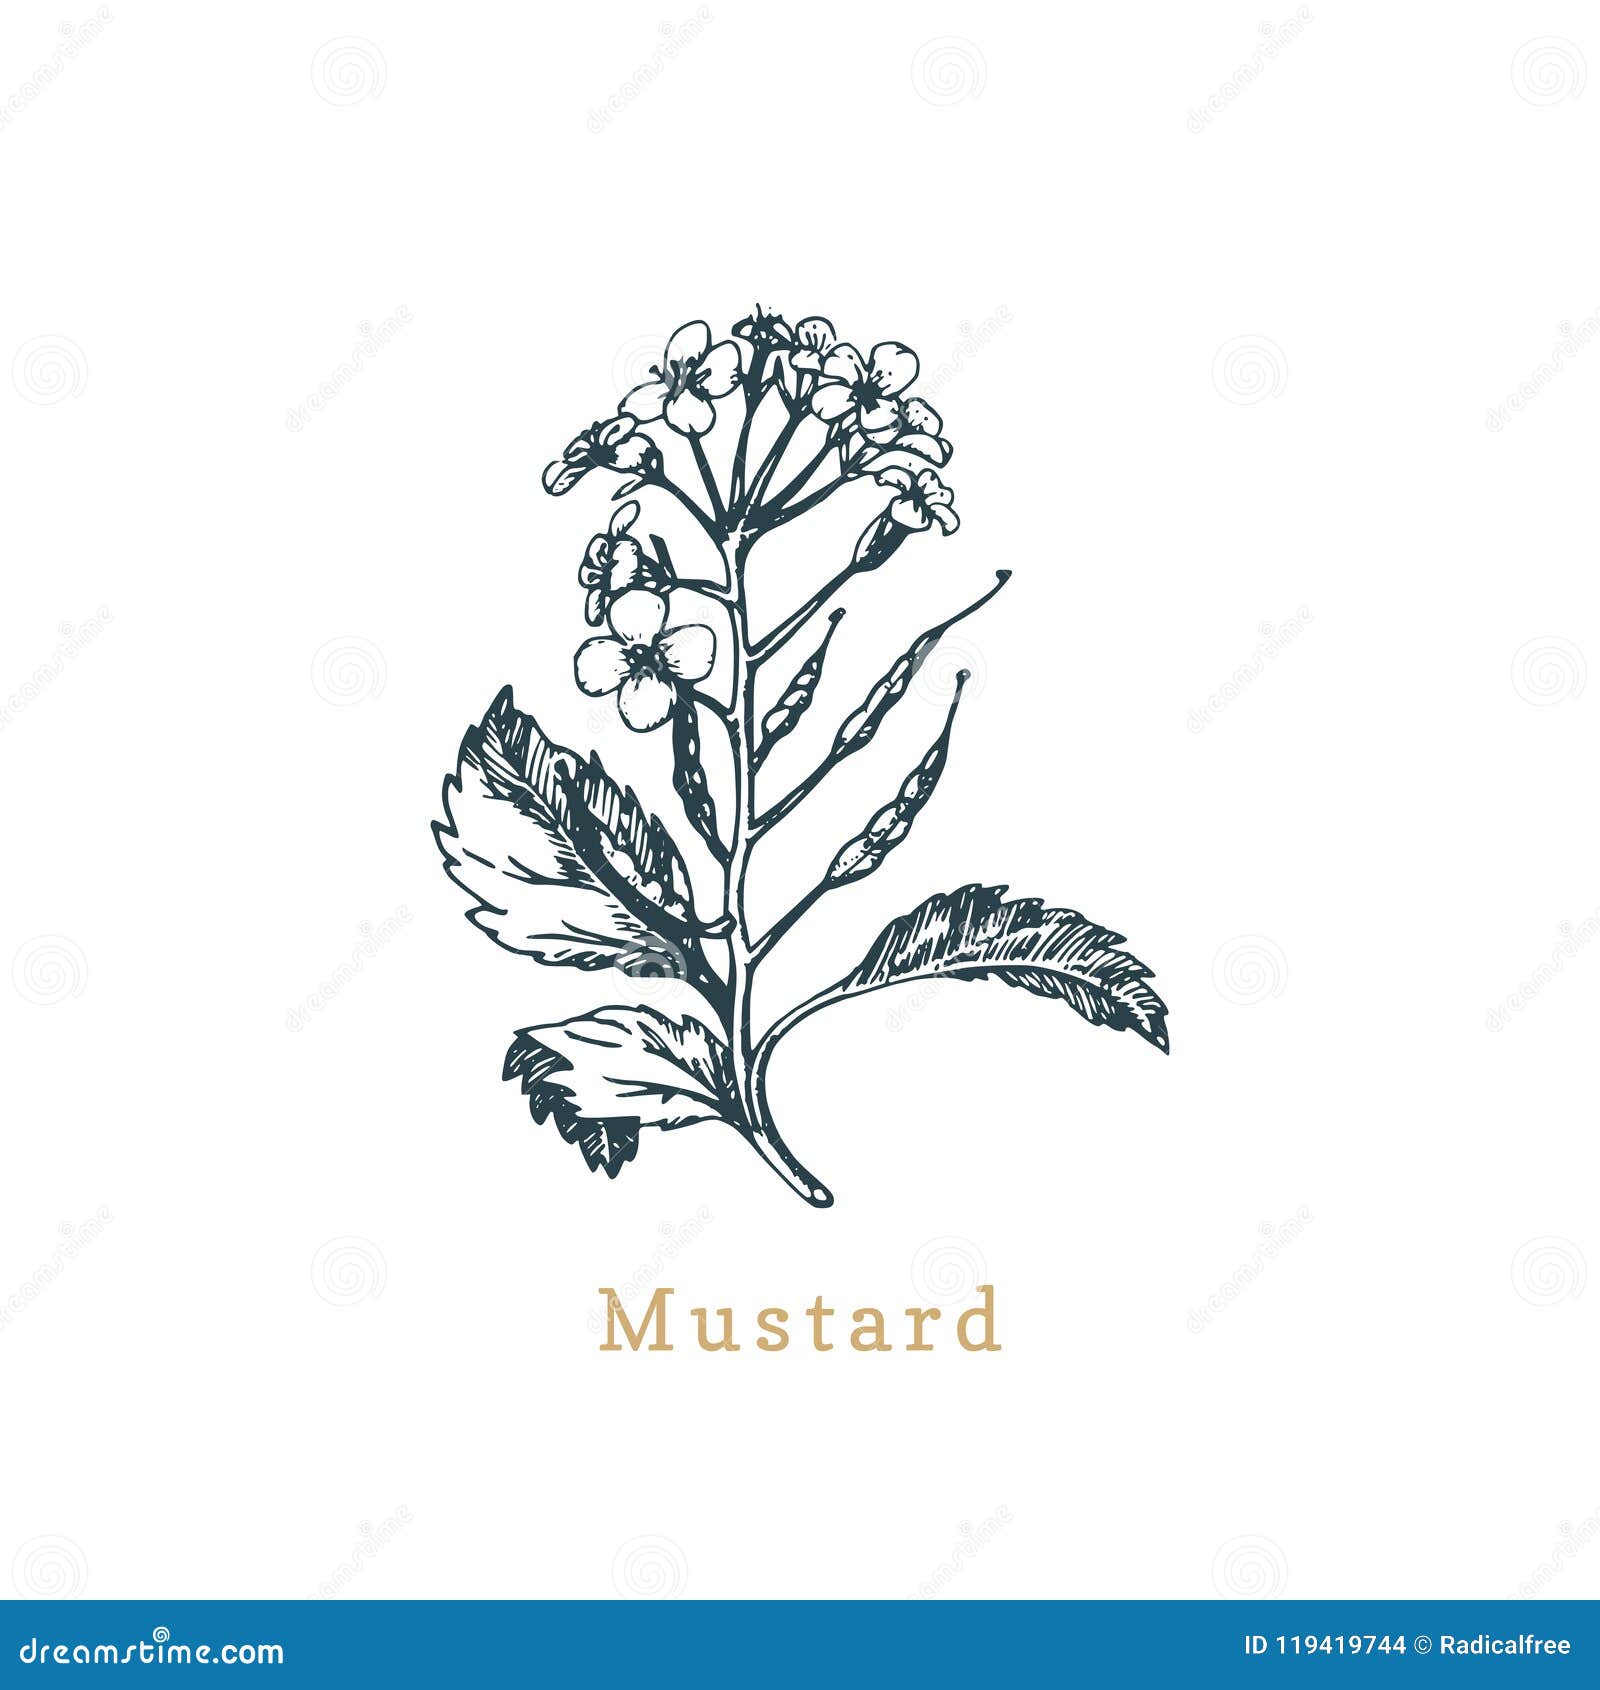 Aggregate 189+ sketch of mustard plant latest